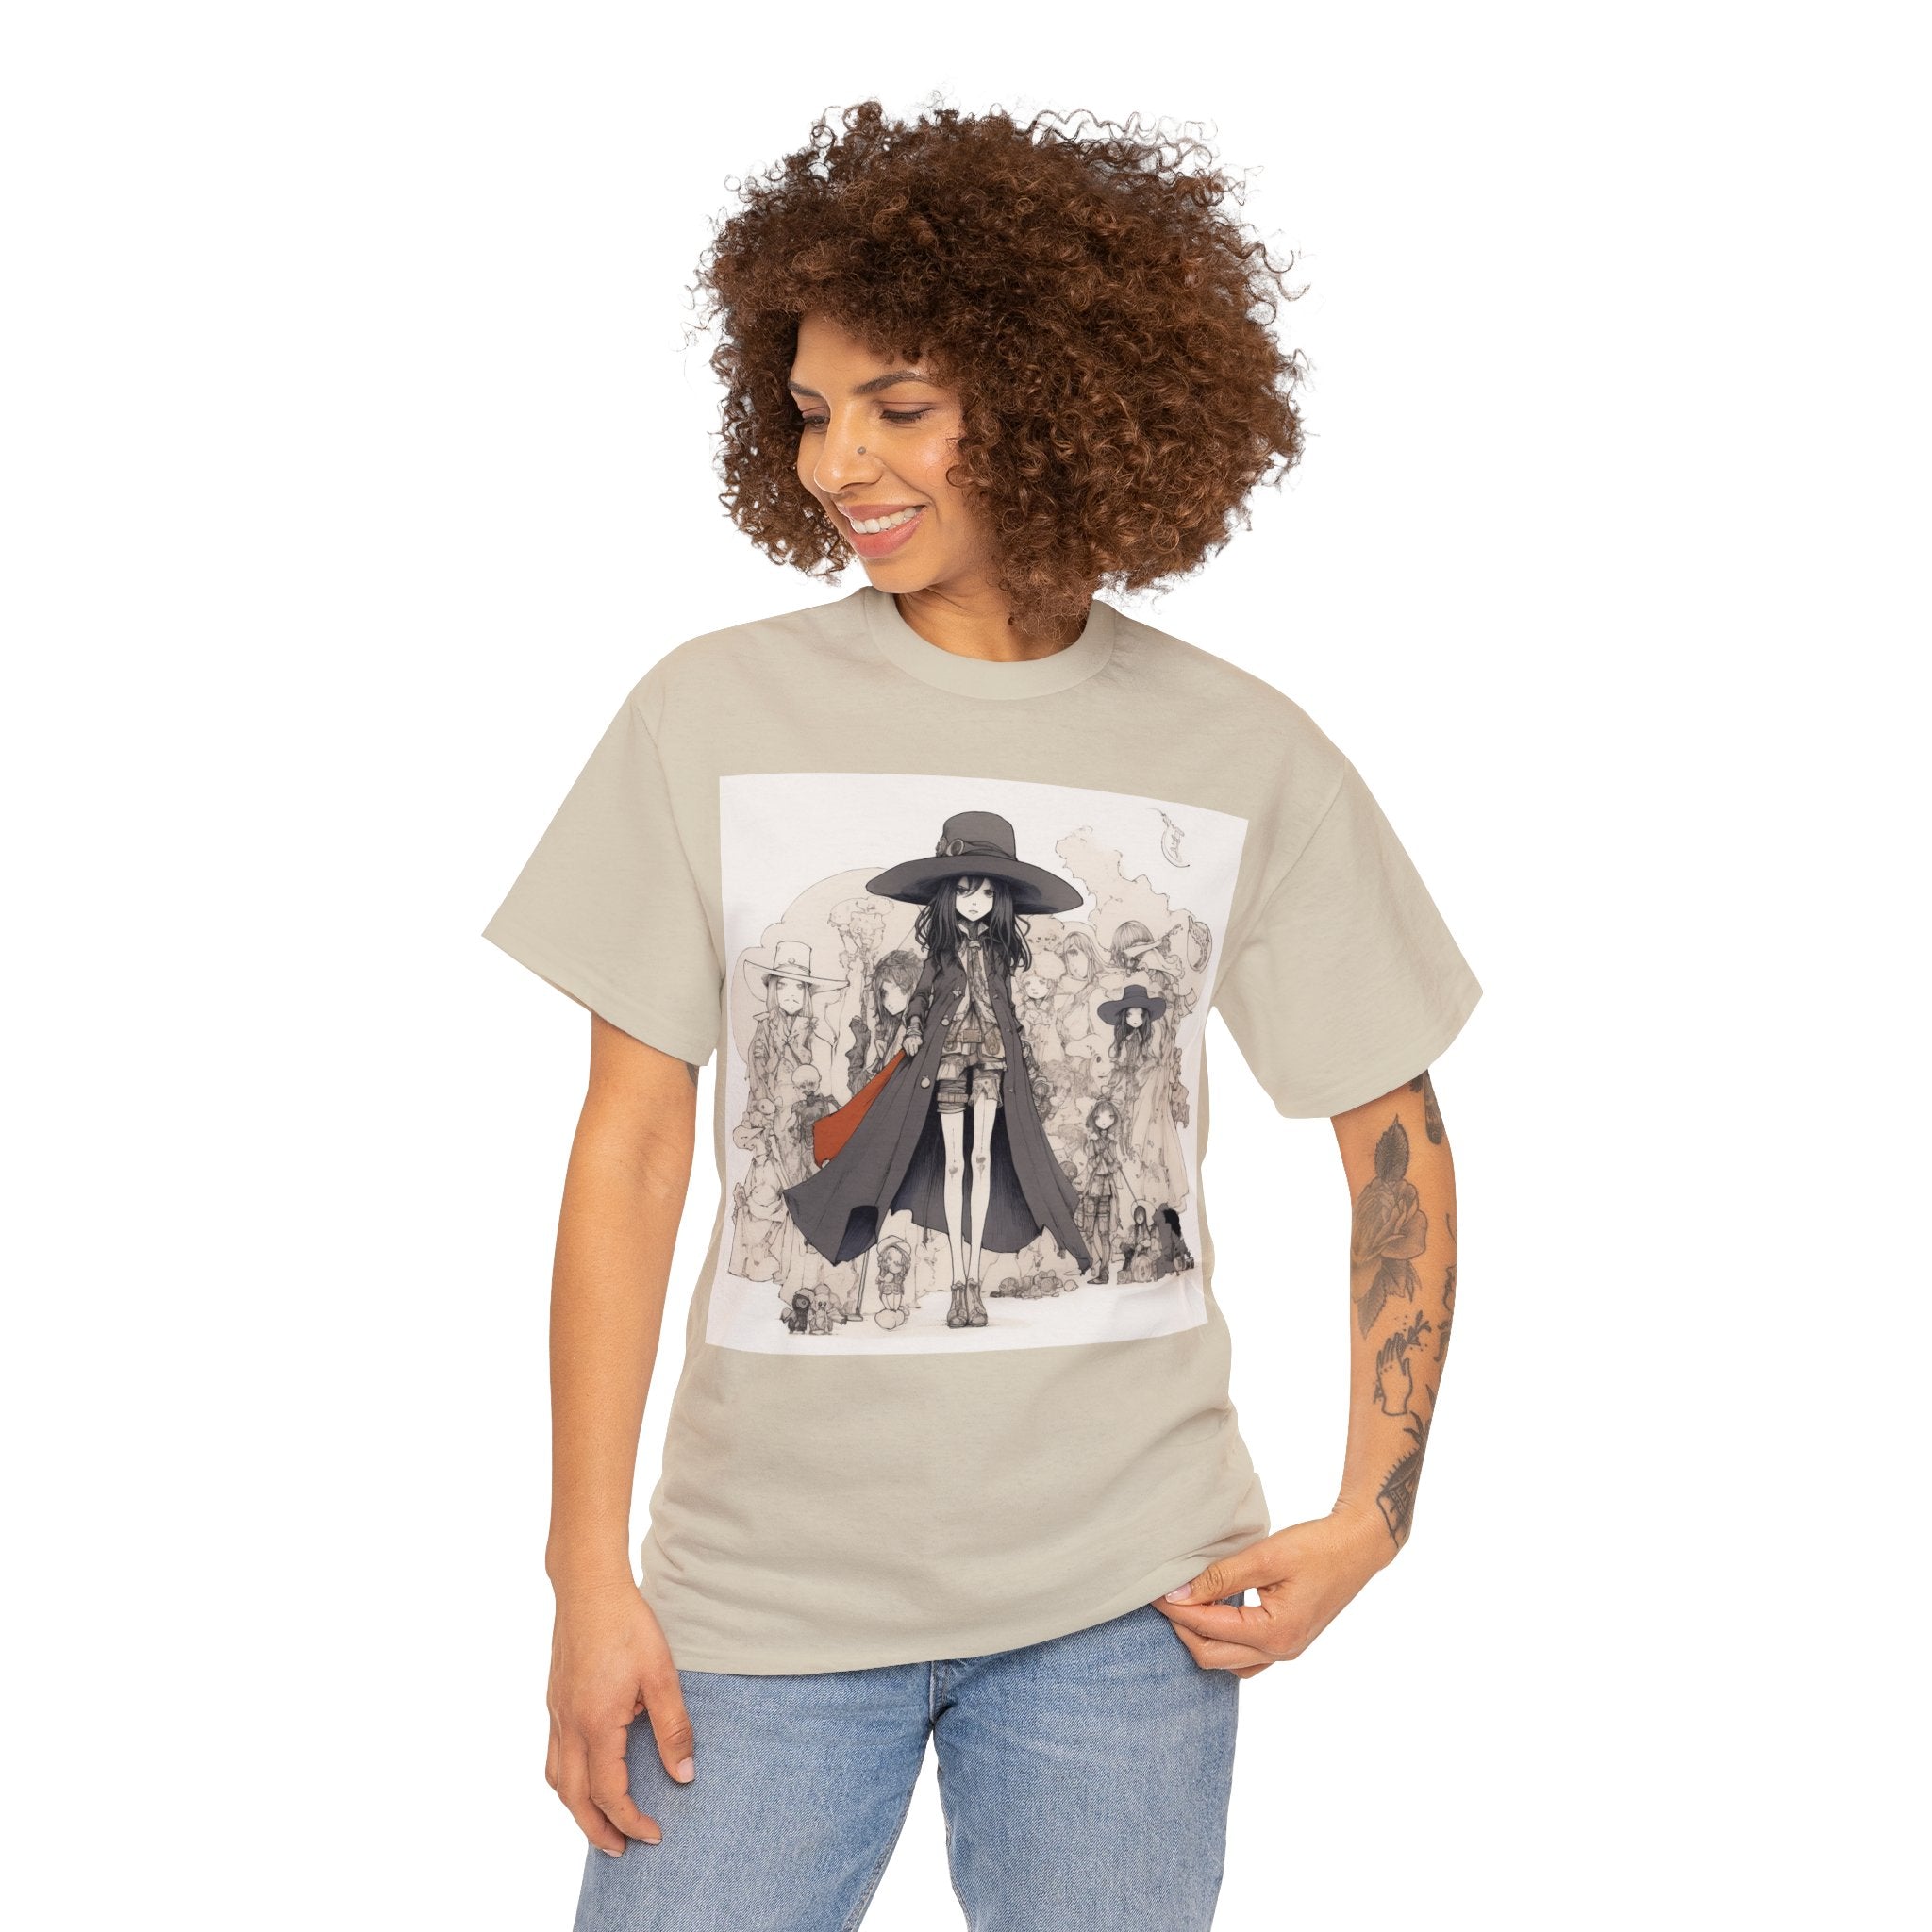 Adorable Anime Girl Vampire Killer Unisex Heavy Cotton Tee - Unique Anime-Inspired Fashion for Fans and Enthusiasts